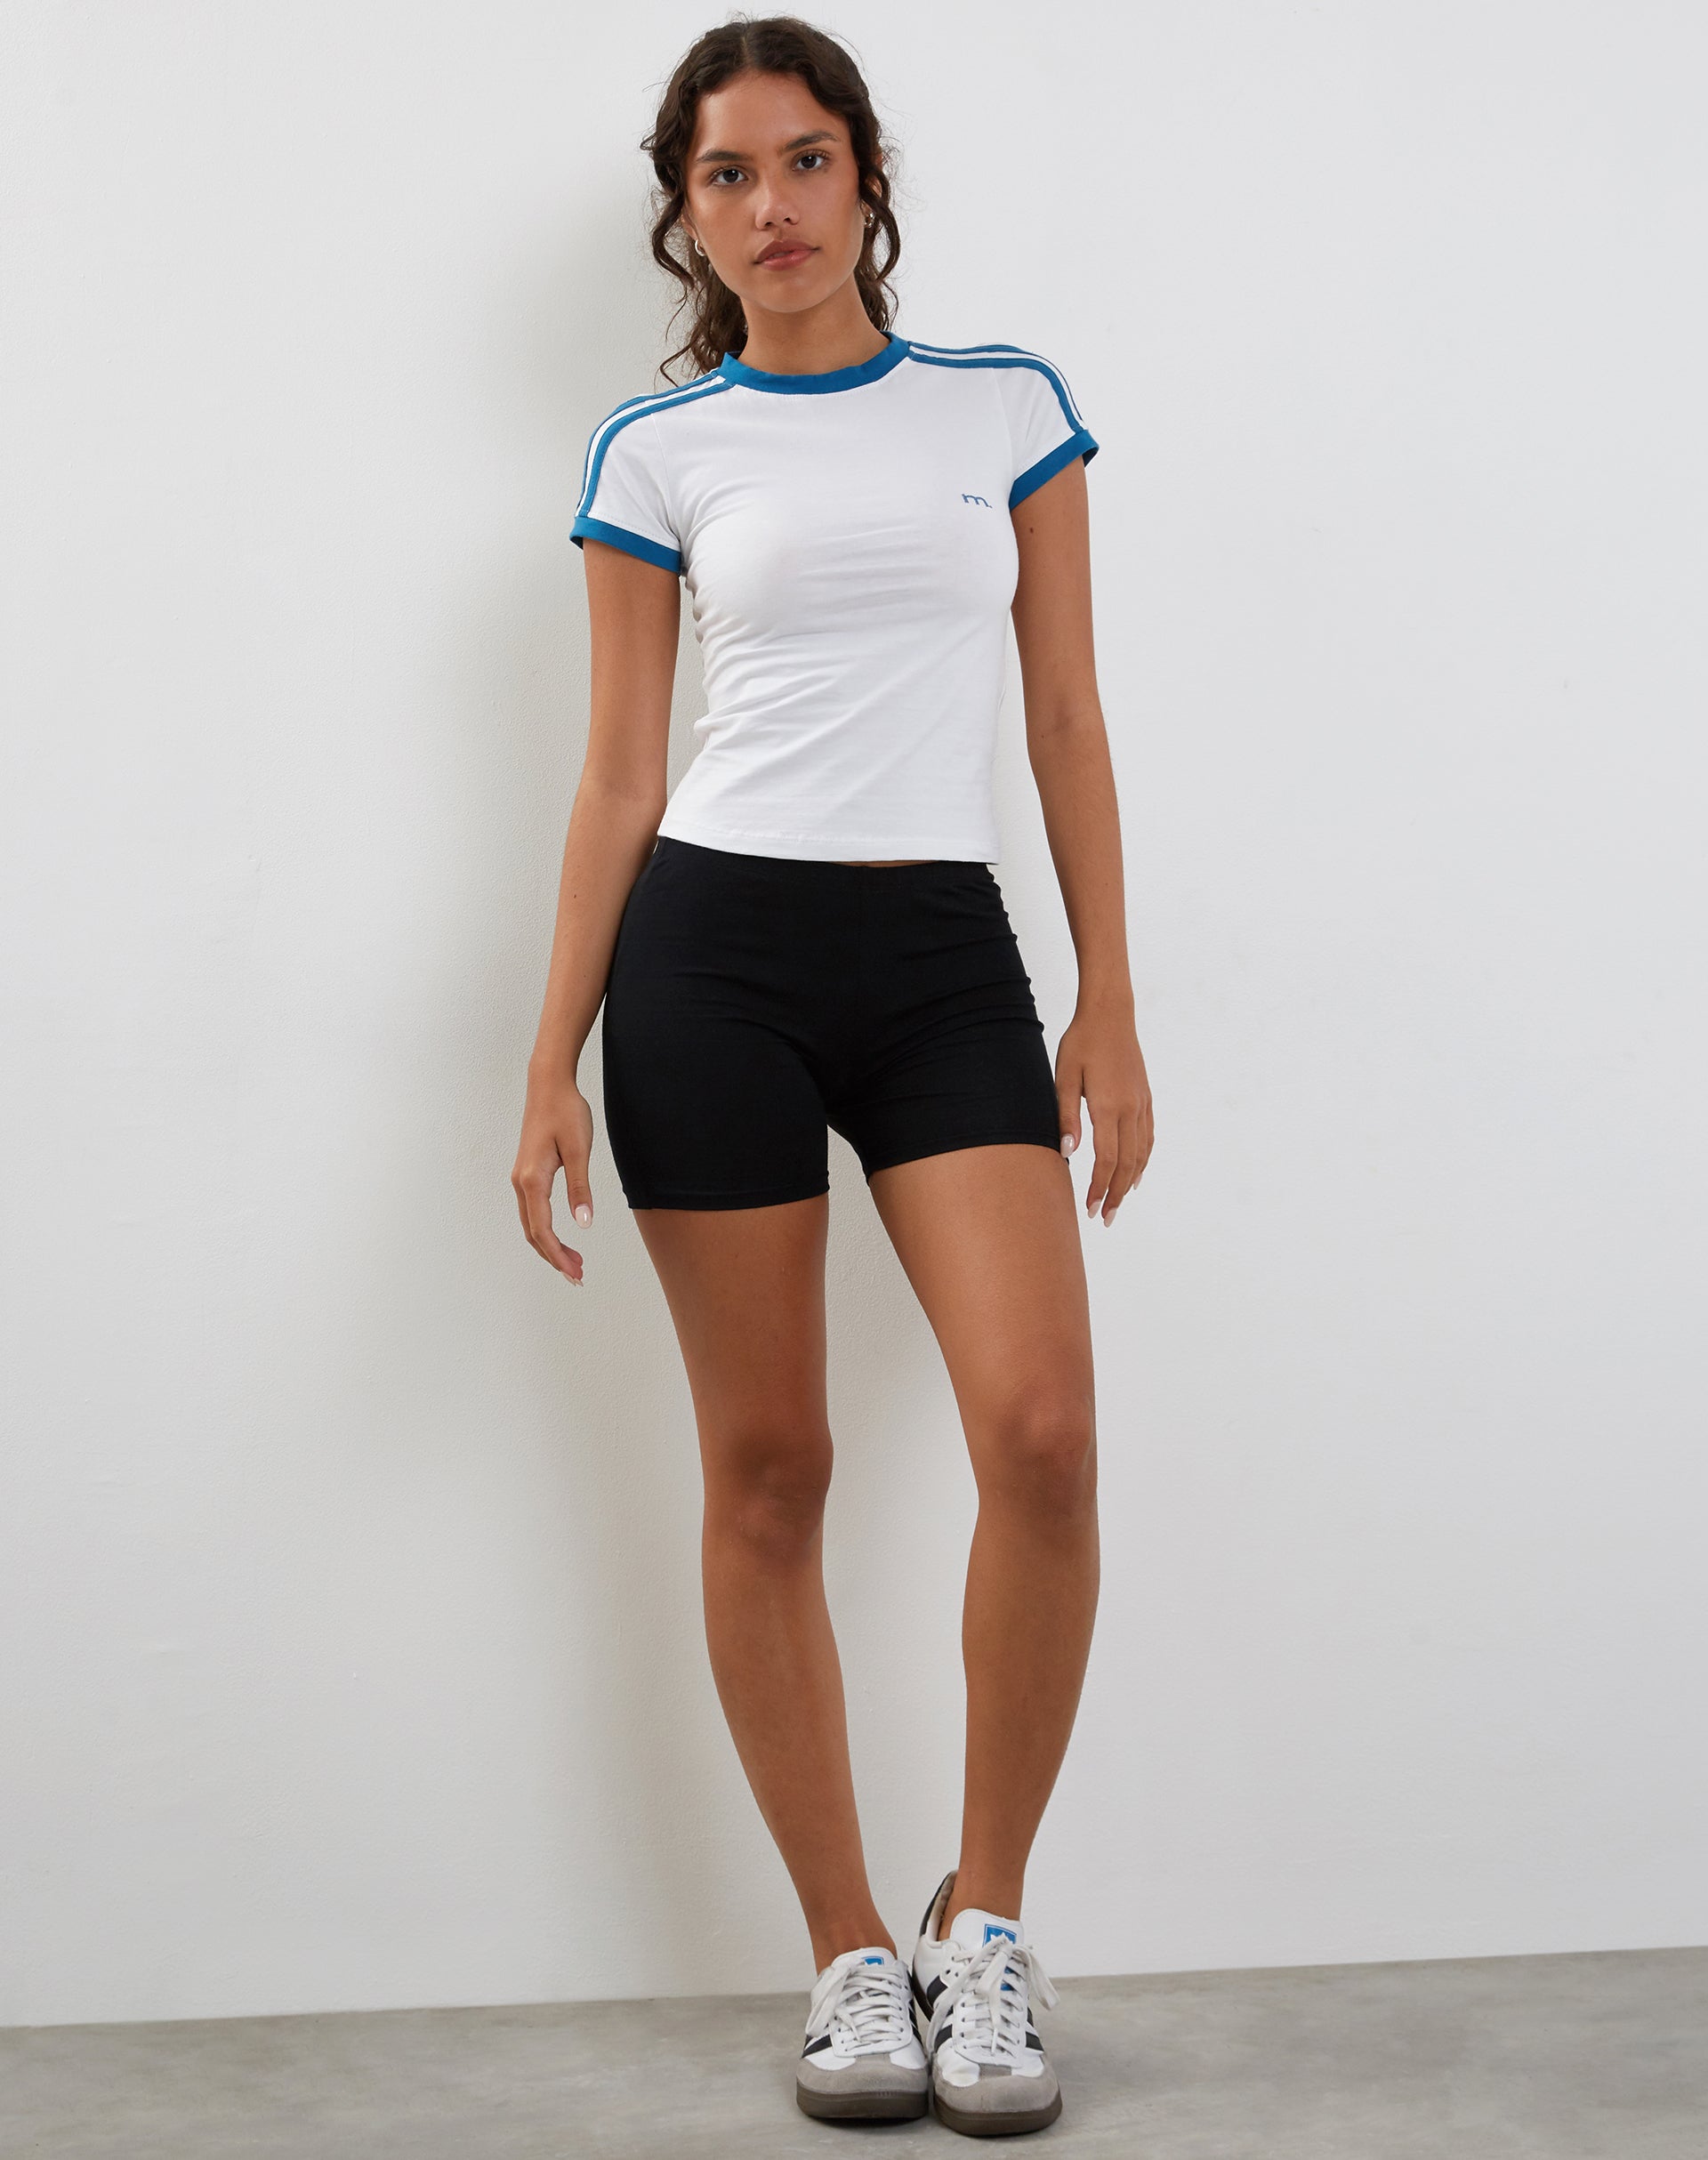 Image of Salda Fitted Tee with Contrast Binding in White